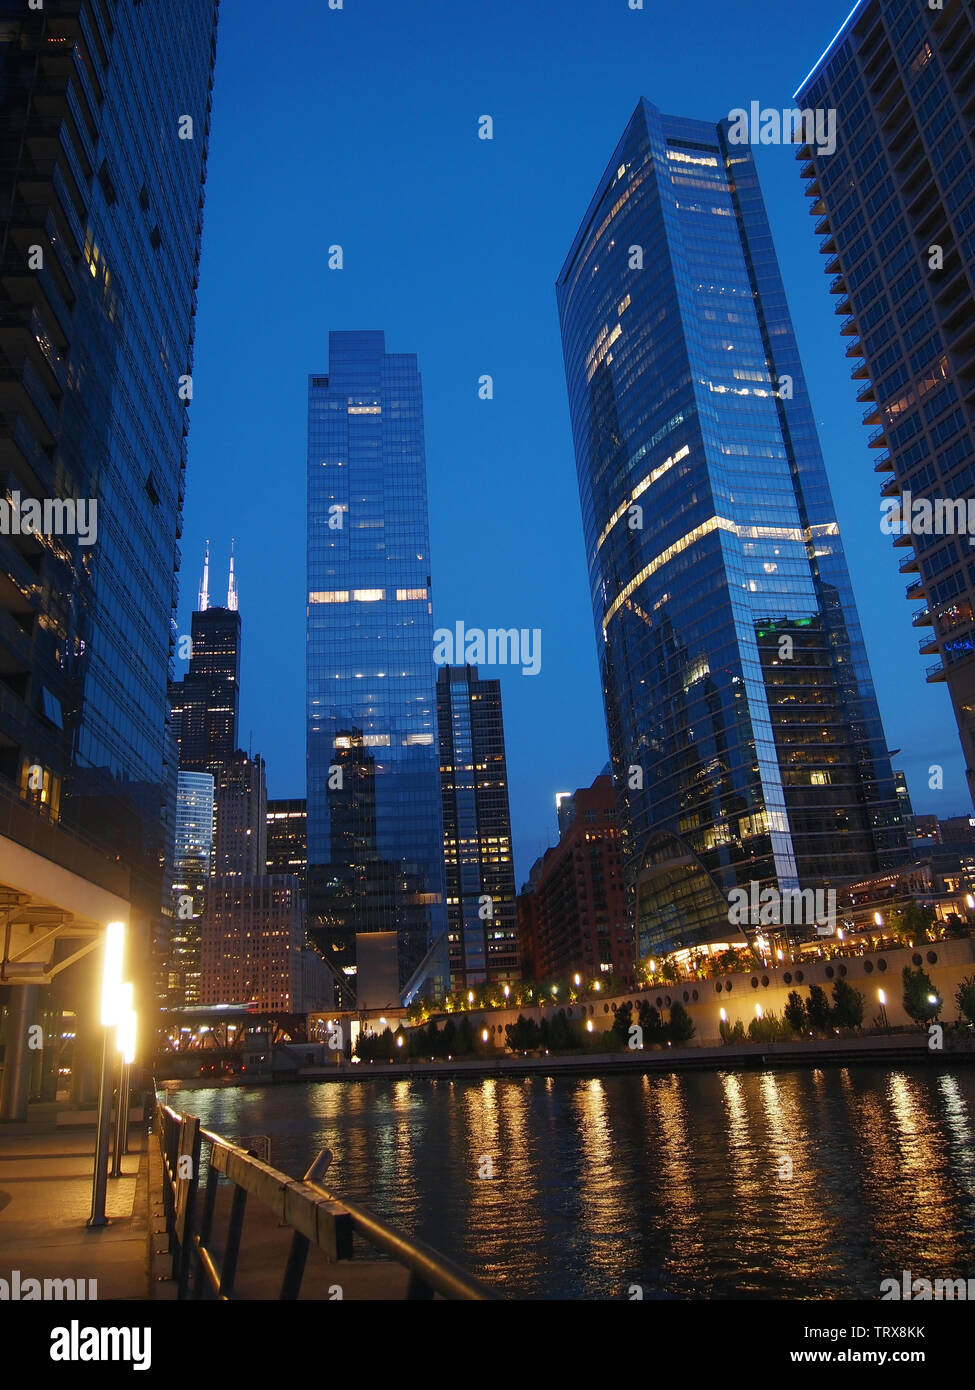 CHICAGO, IL  - JULY 28, 2018: Some of the famous skyscrapers of Chicago, including the sparkling River Point,  stretch out along the length of the Chi Stock Photo